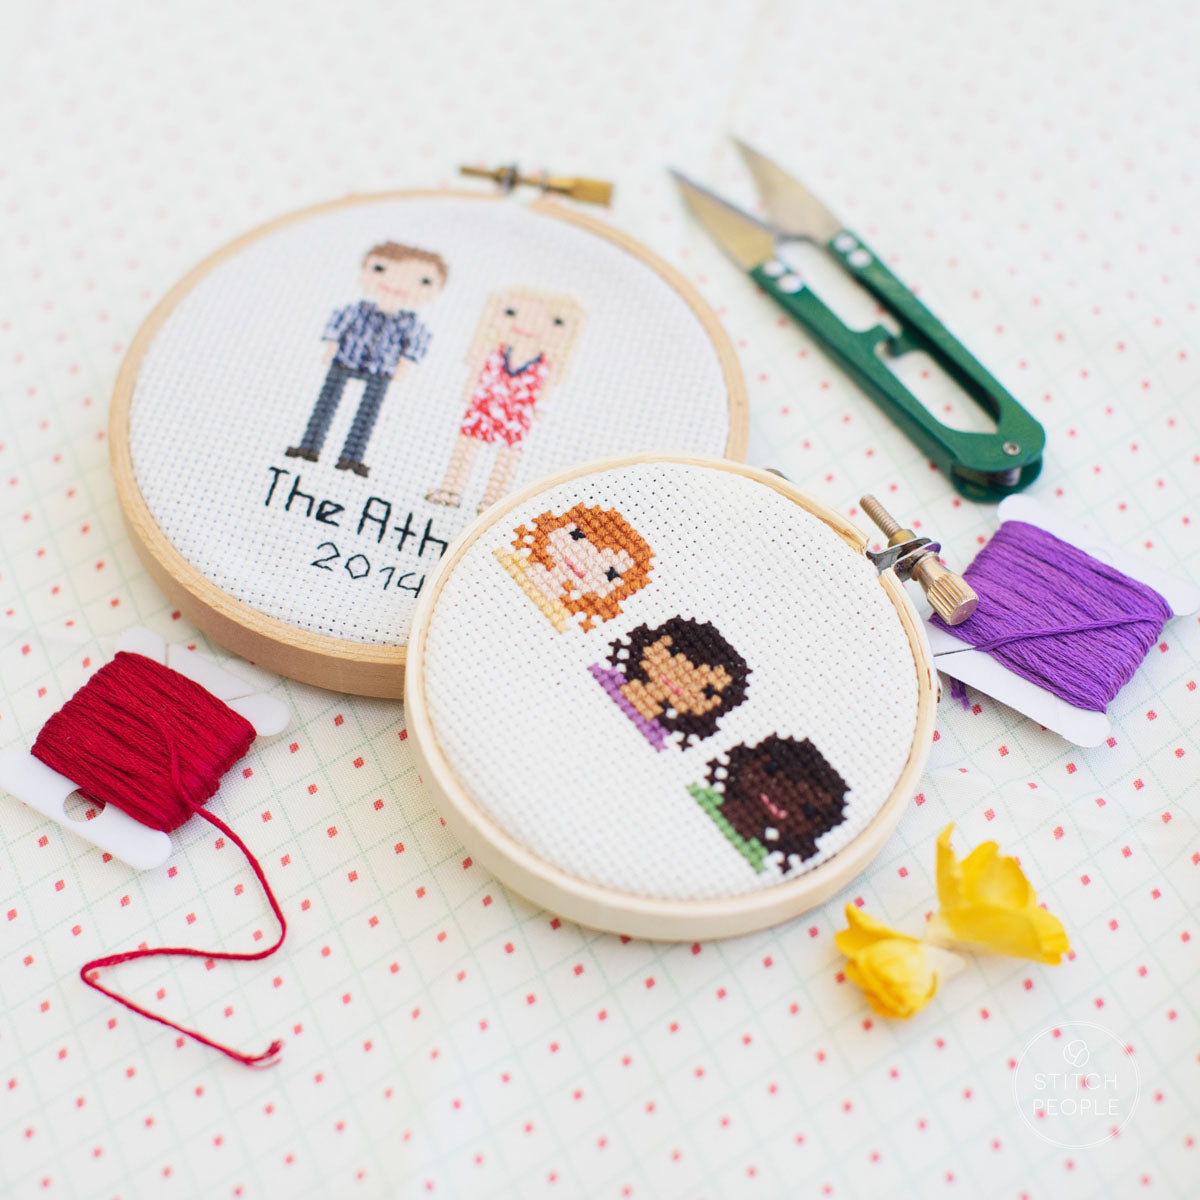 The Ultimate Cross Stitch Portrait Thread Collection by Stitch People